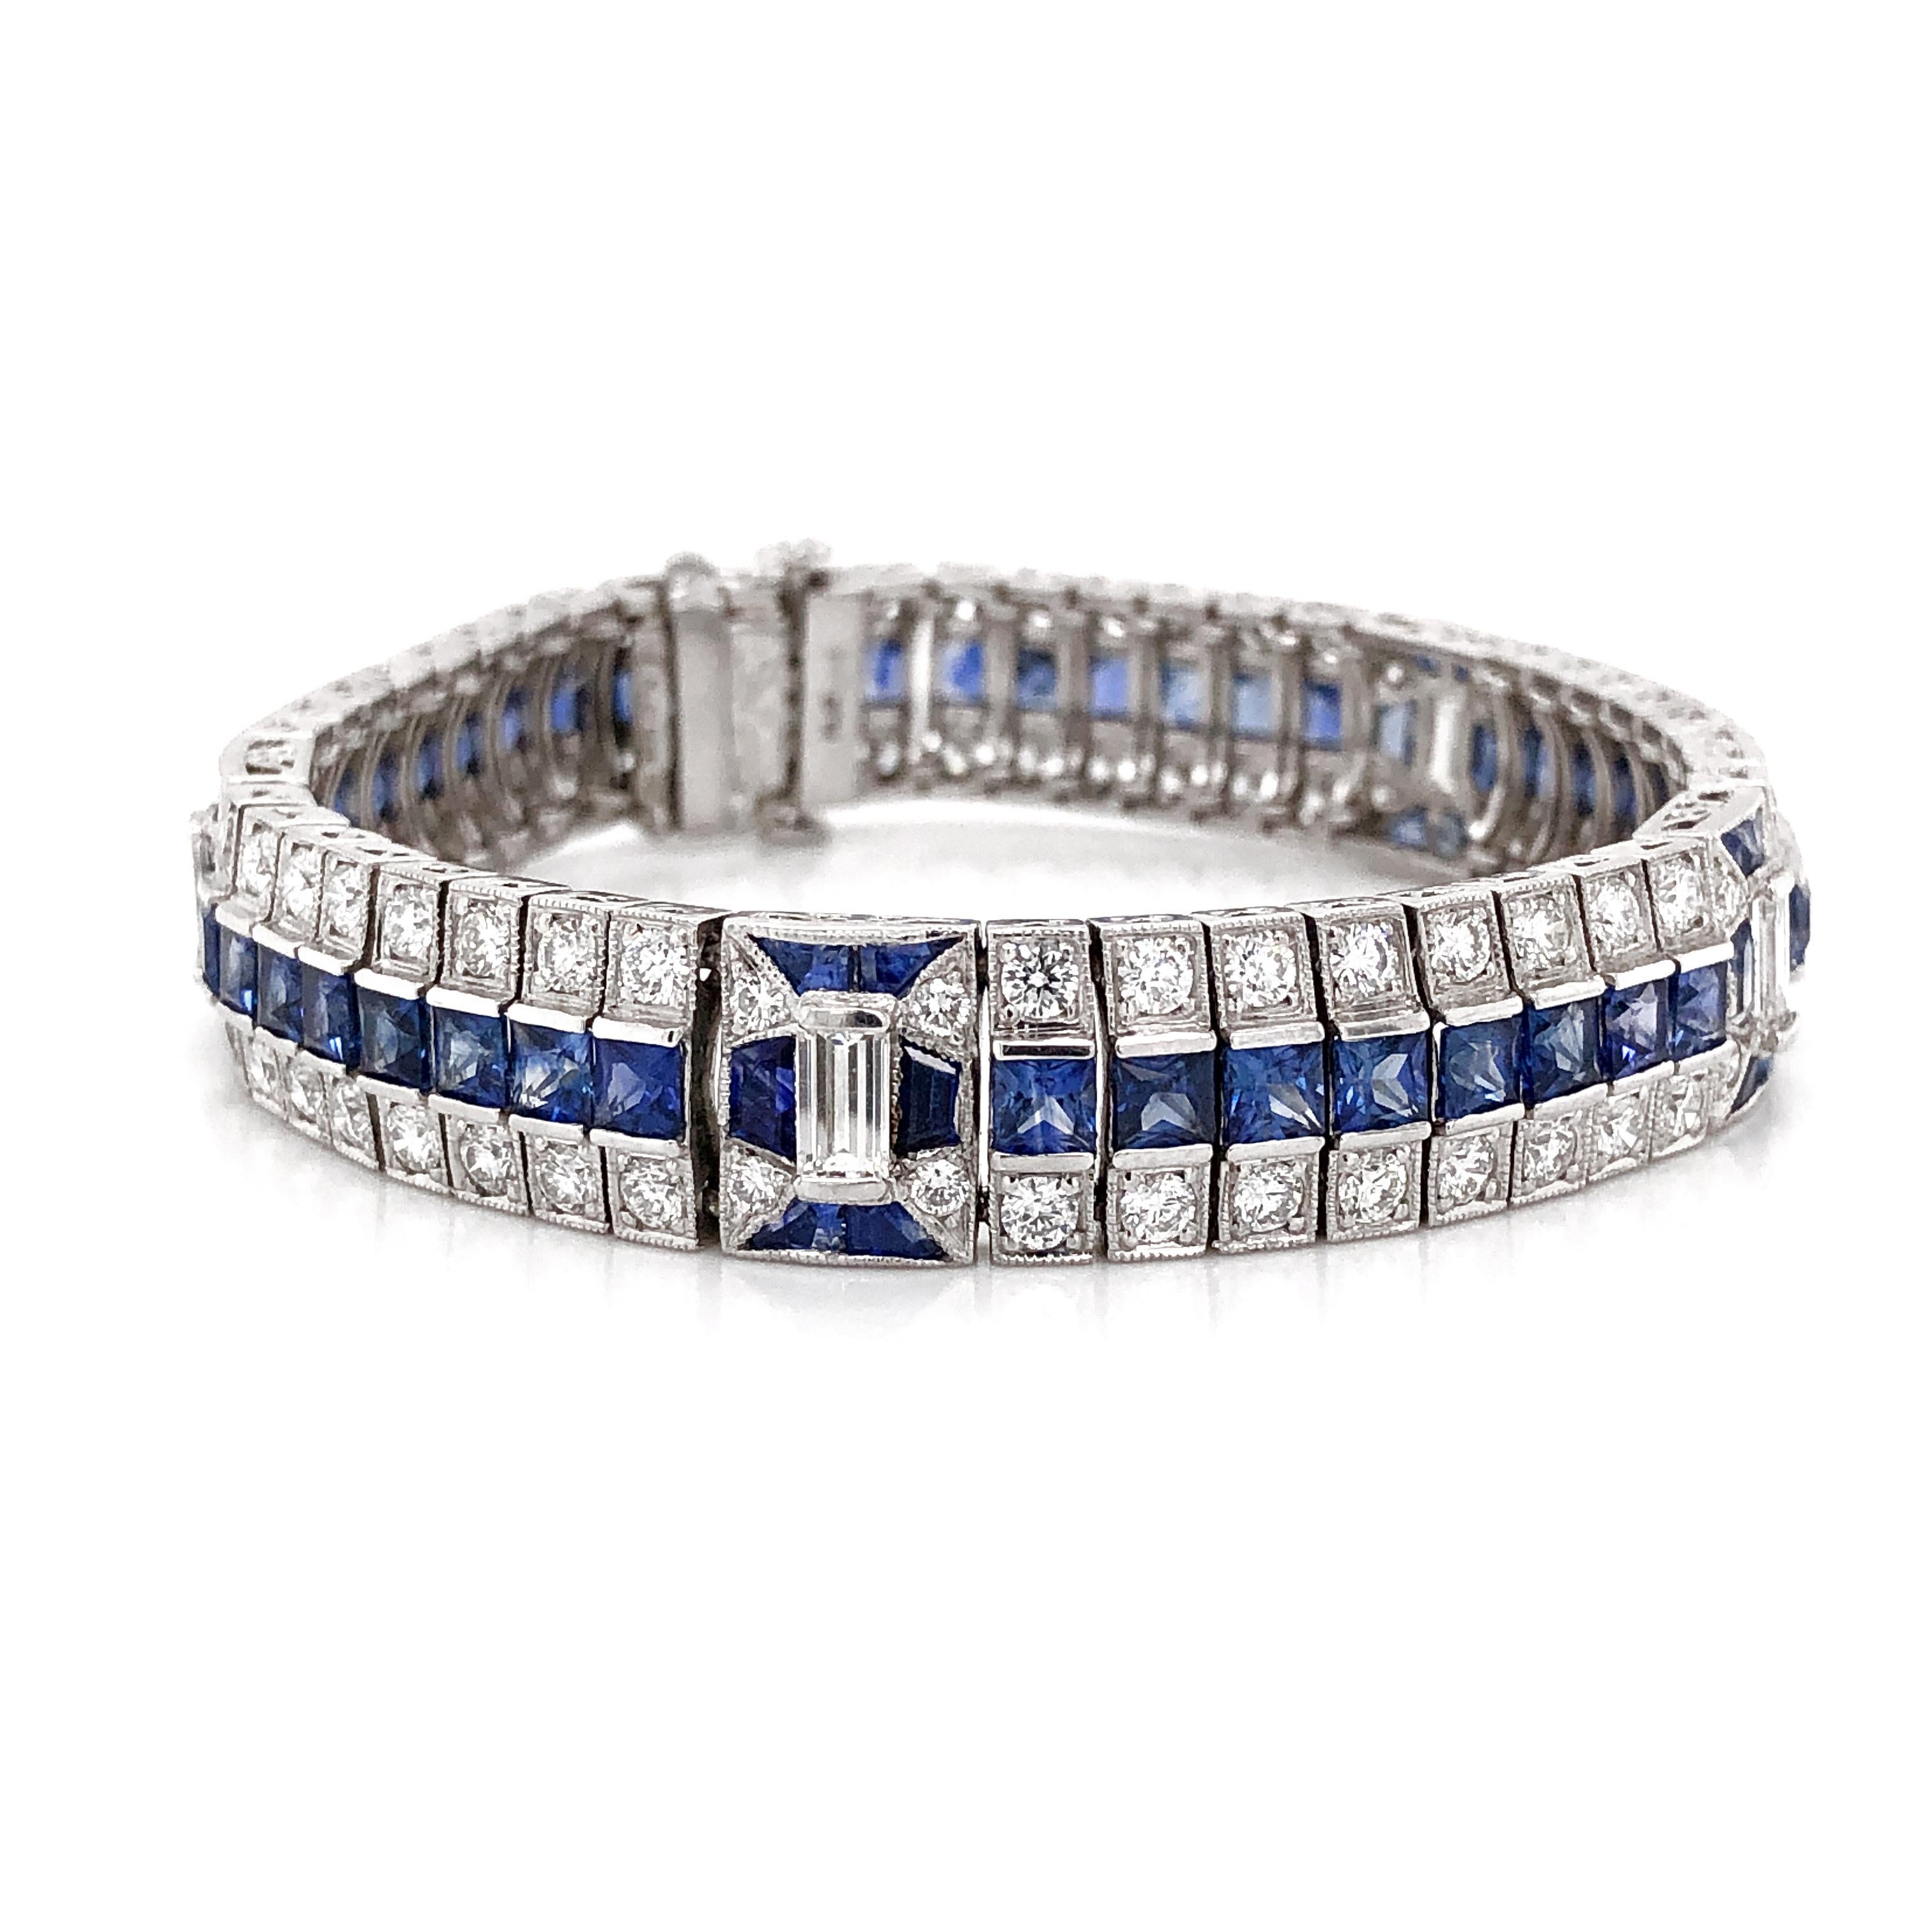 Ceylon French Square Cut Sapphires 14.38 Carat Diamond Platinum Link Bracelet In New Condition For Sale In New York, NY